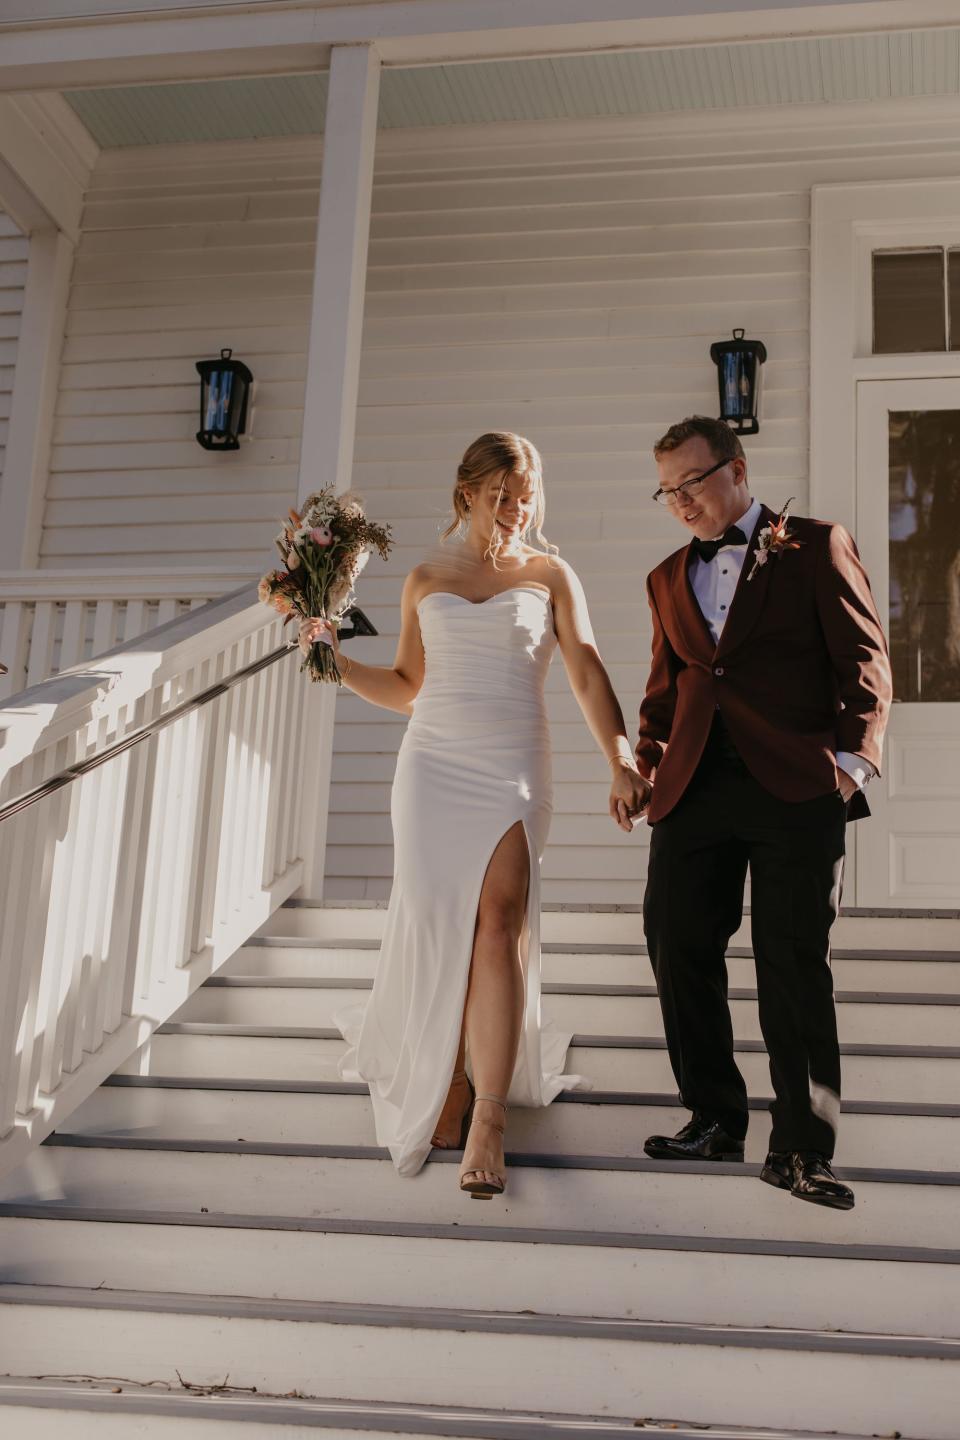 A bride and groom hold hands and walk down a staircase together.